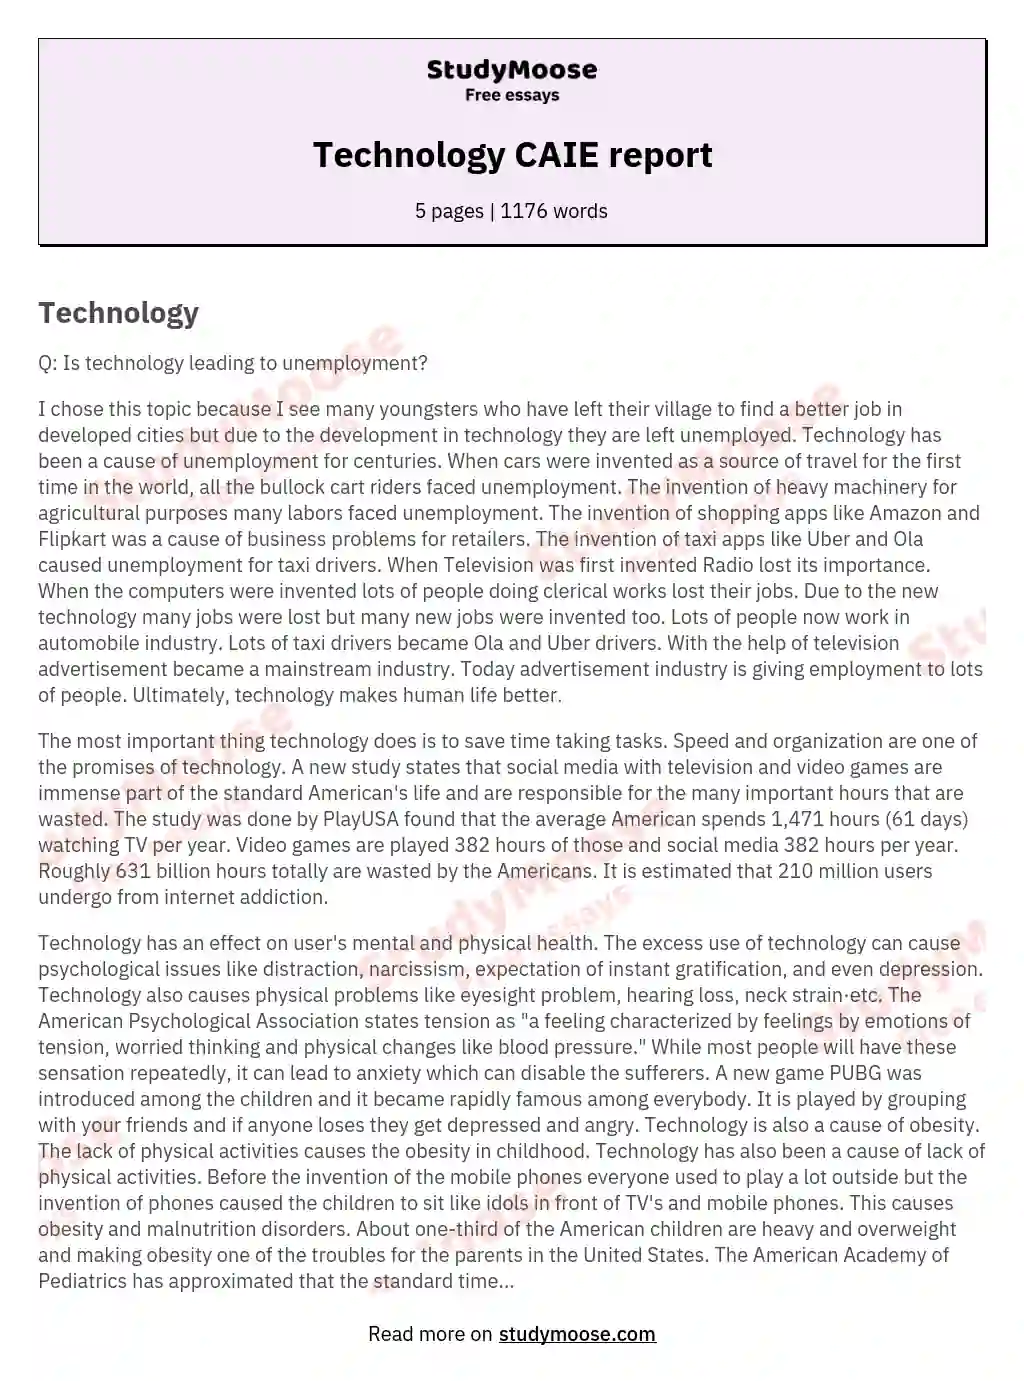 Technology CAIE report essay